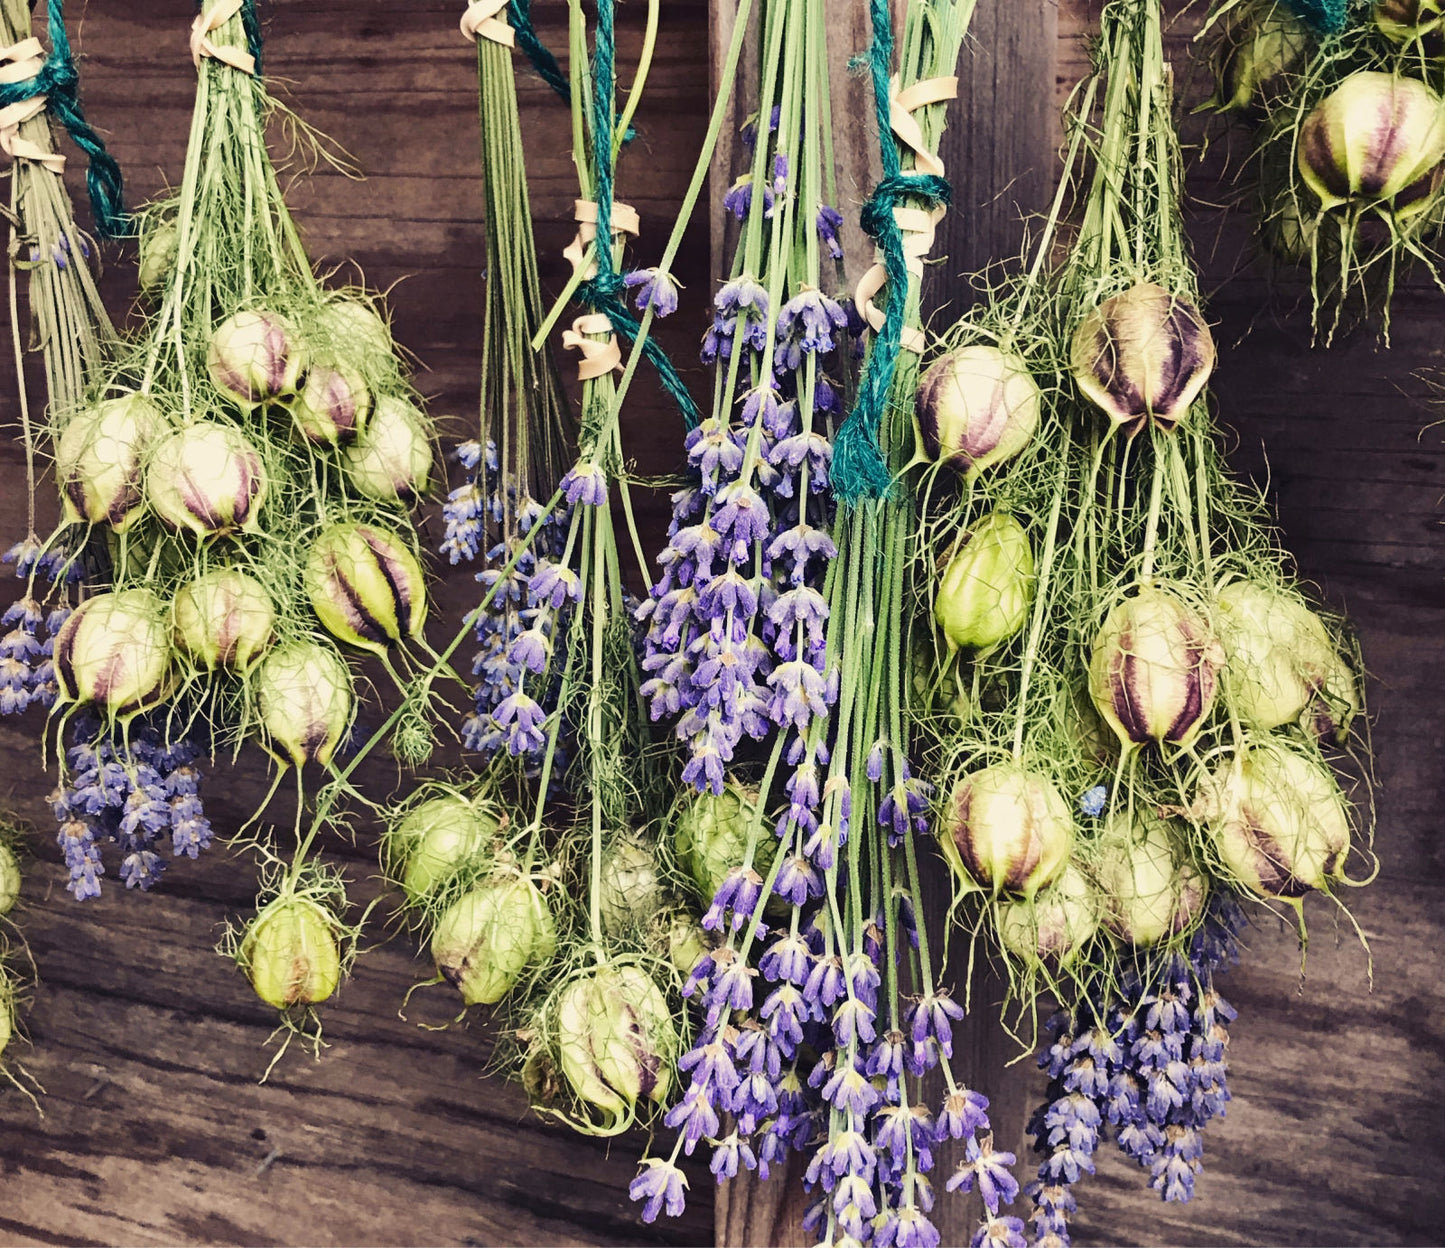 Lavender flowers in drying shed